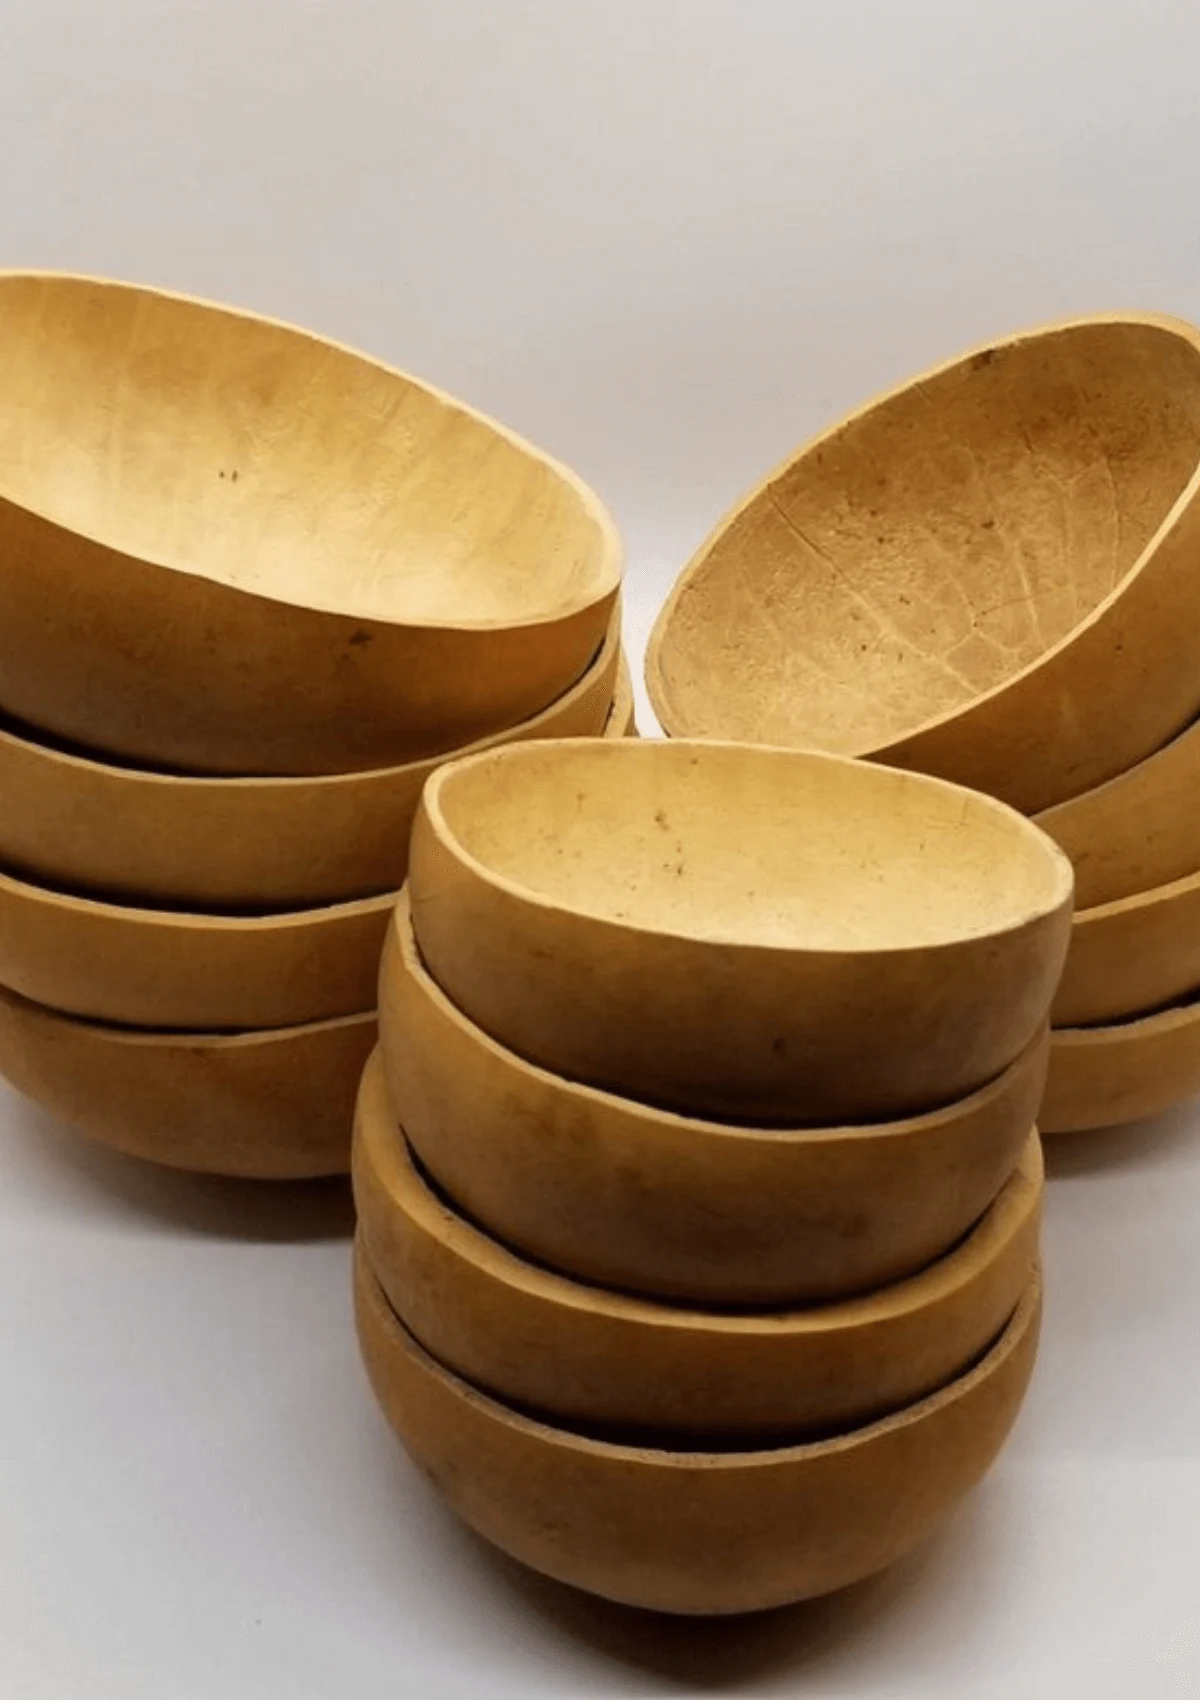 Calabash bowls from the Caribbean